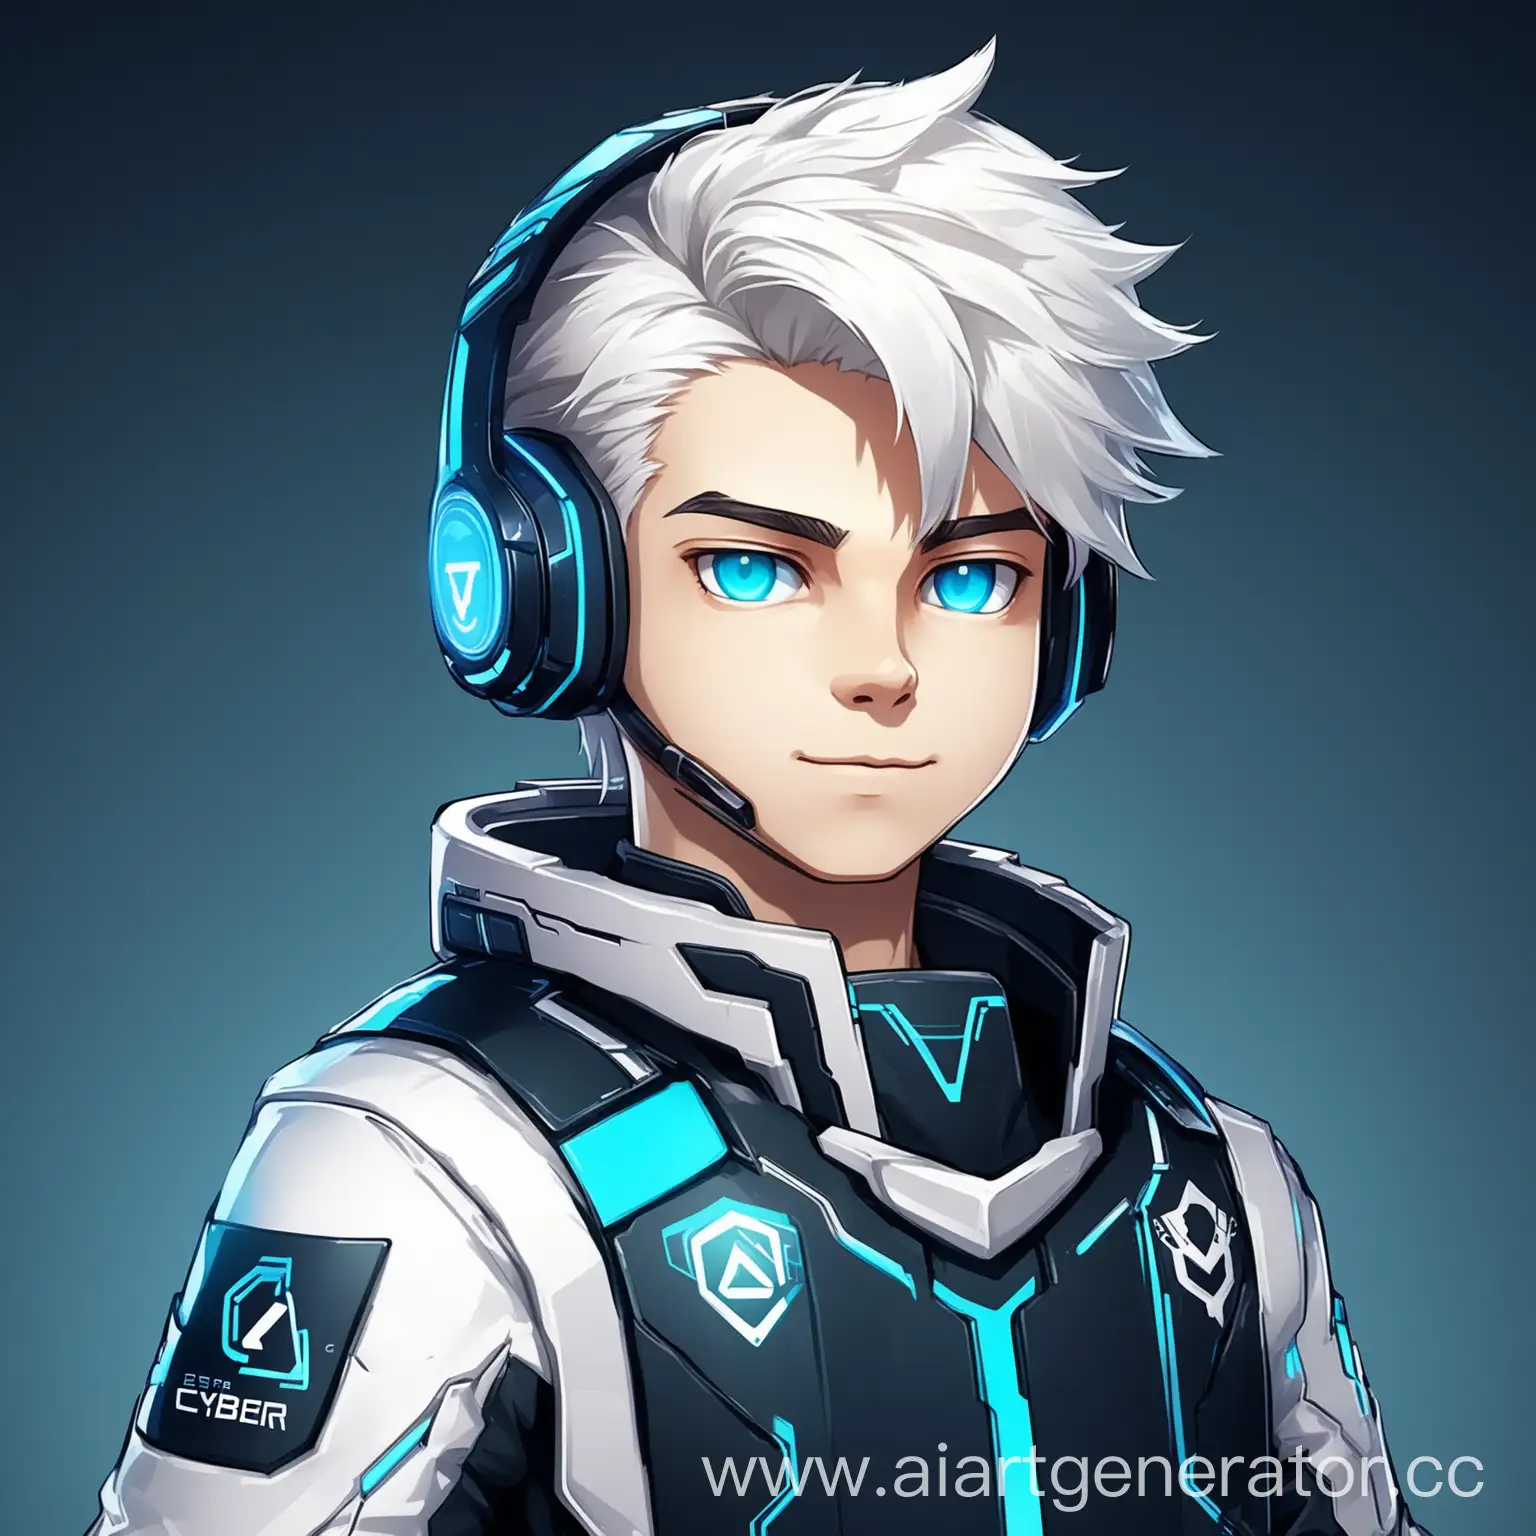 Young-Cyber-Sports-Captain-Avatar-with-White-Hair